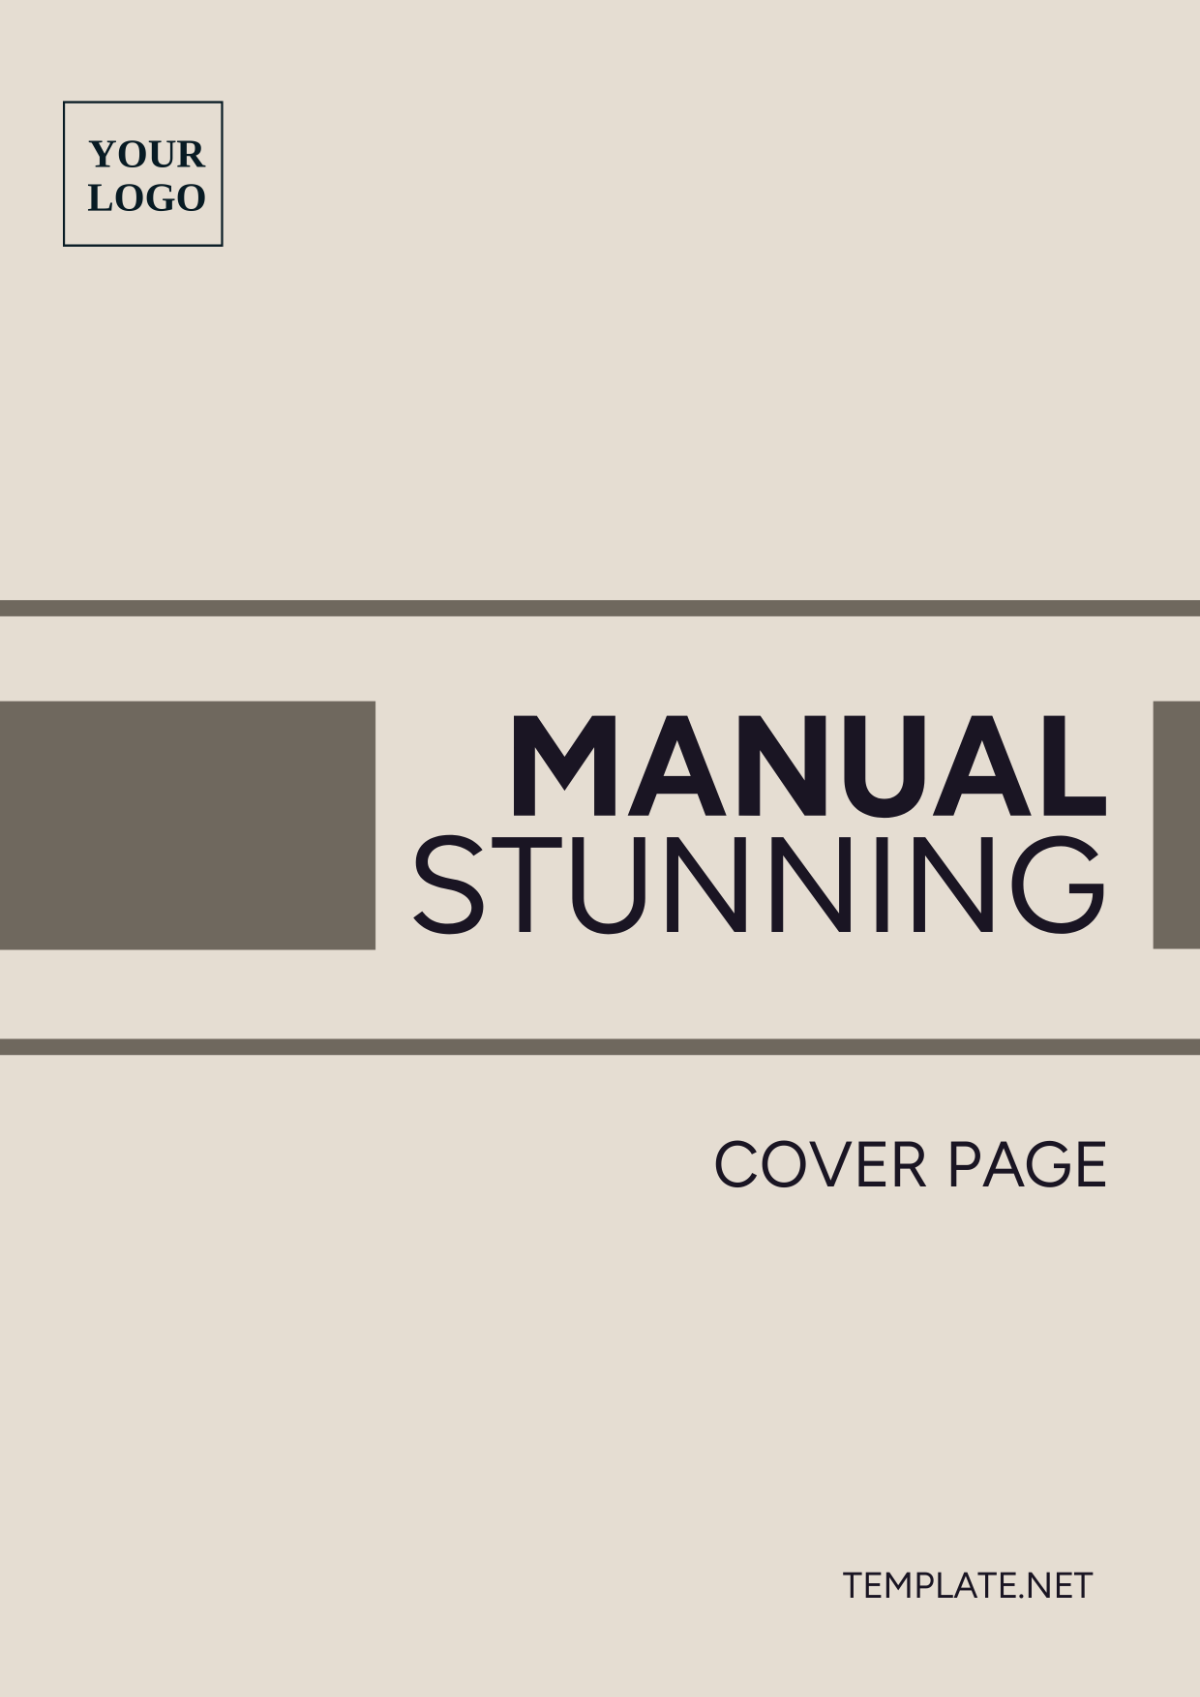 Manual Stunning Cover Page Template